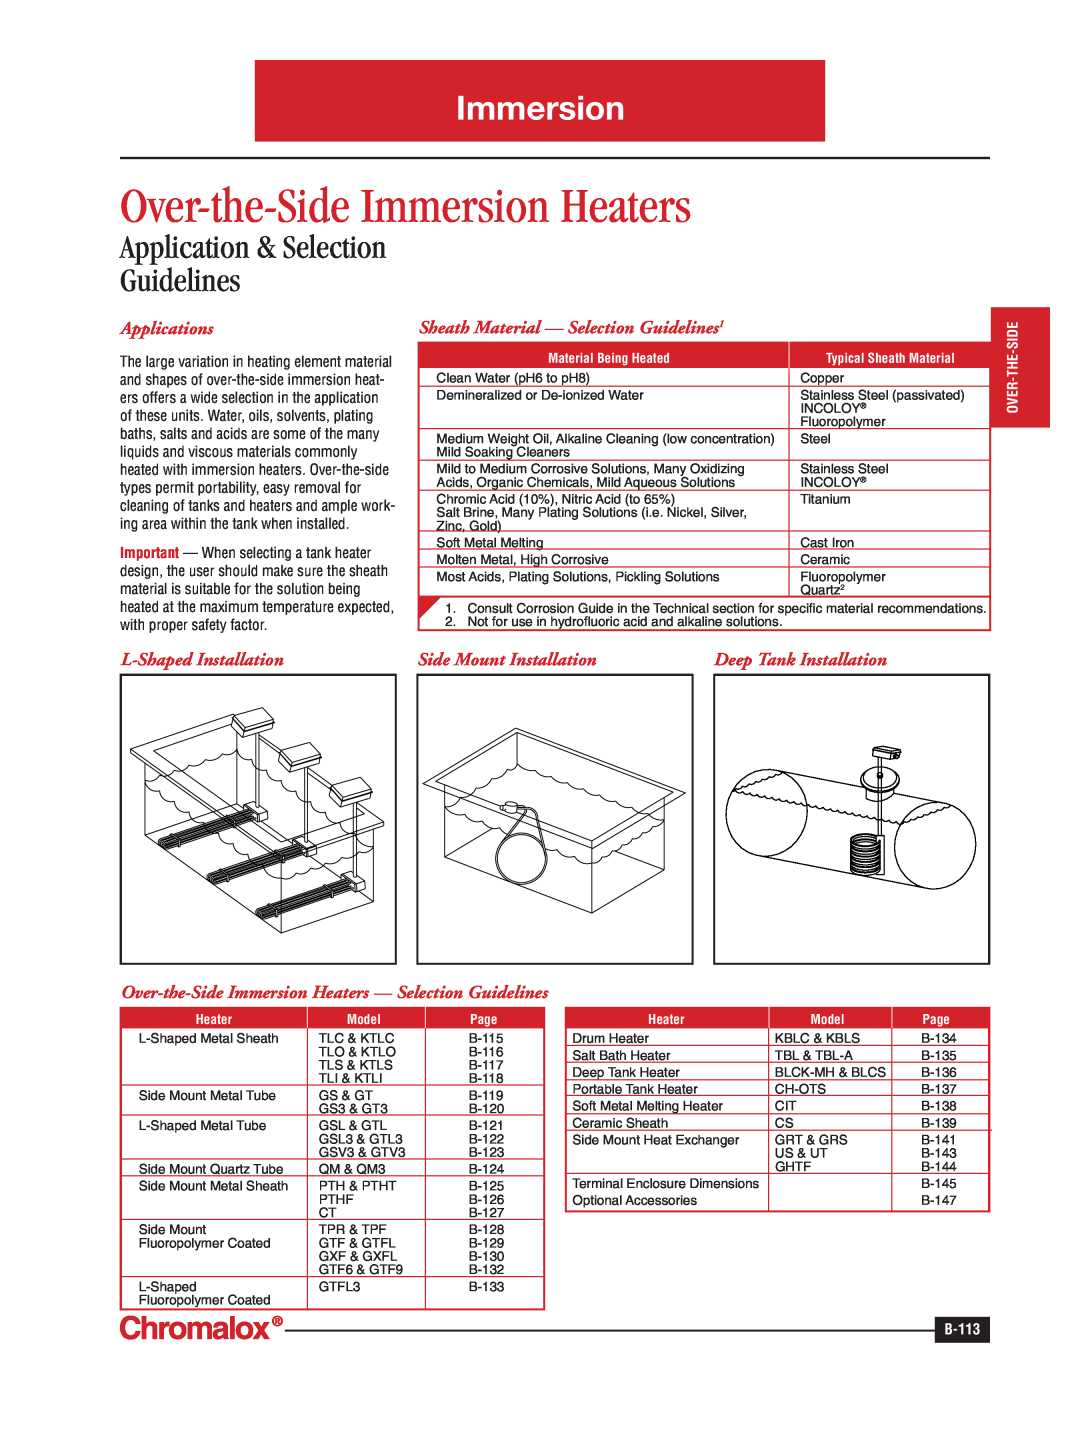 Chromalox B-113 dimensions Over-the-Side Immersion Heaters, Application & Selection Guidelines, Applications, Model, Page 